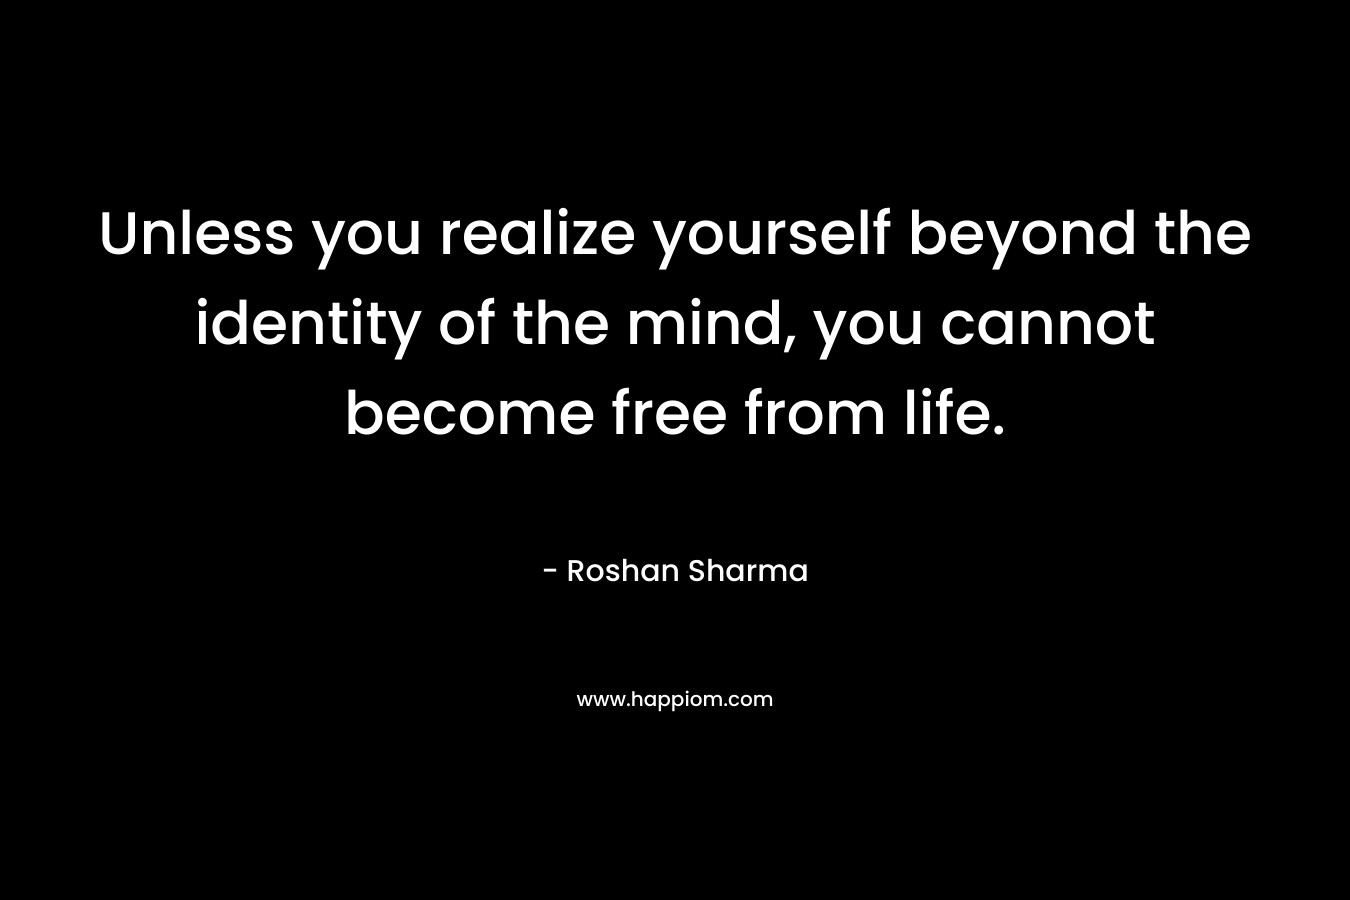 Unless you realize yourself beyond the identity of the mind, you cannot become free from life.